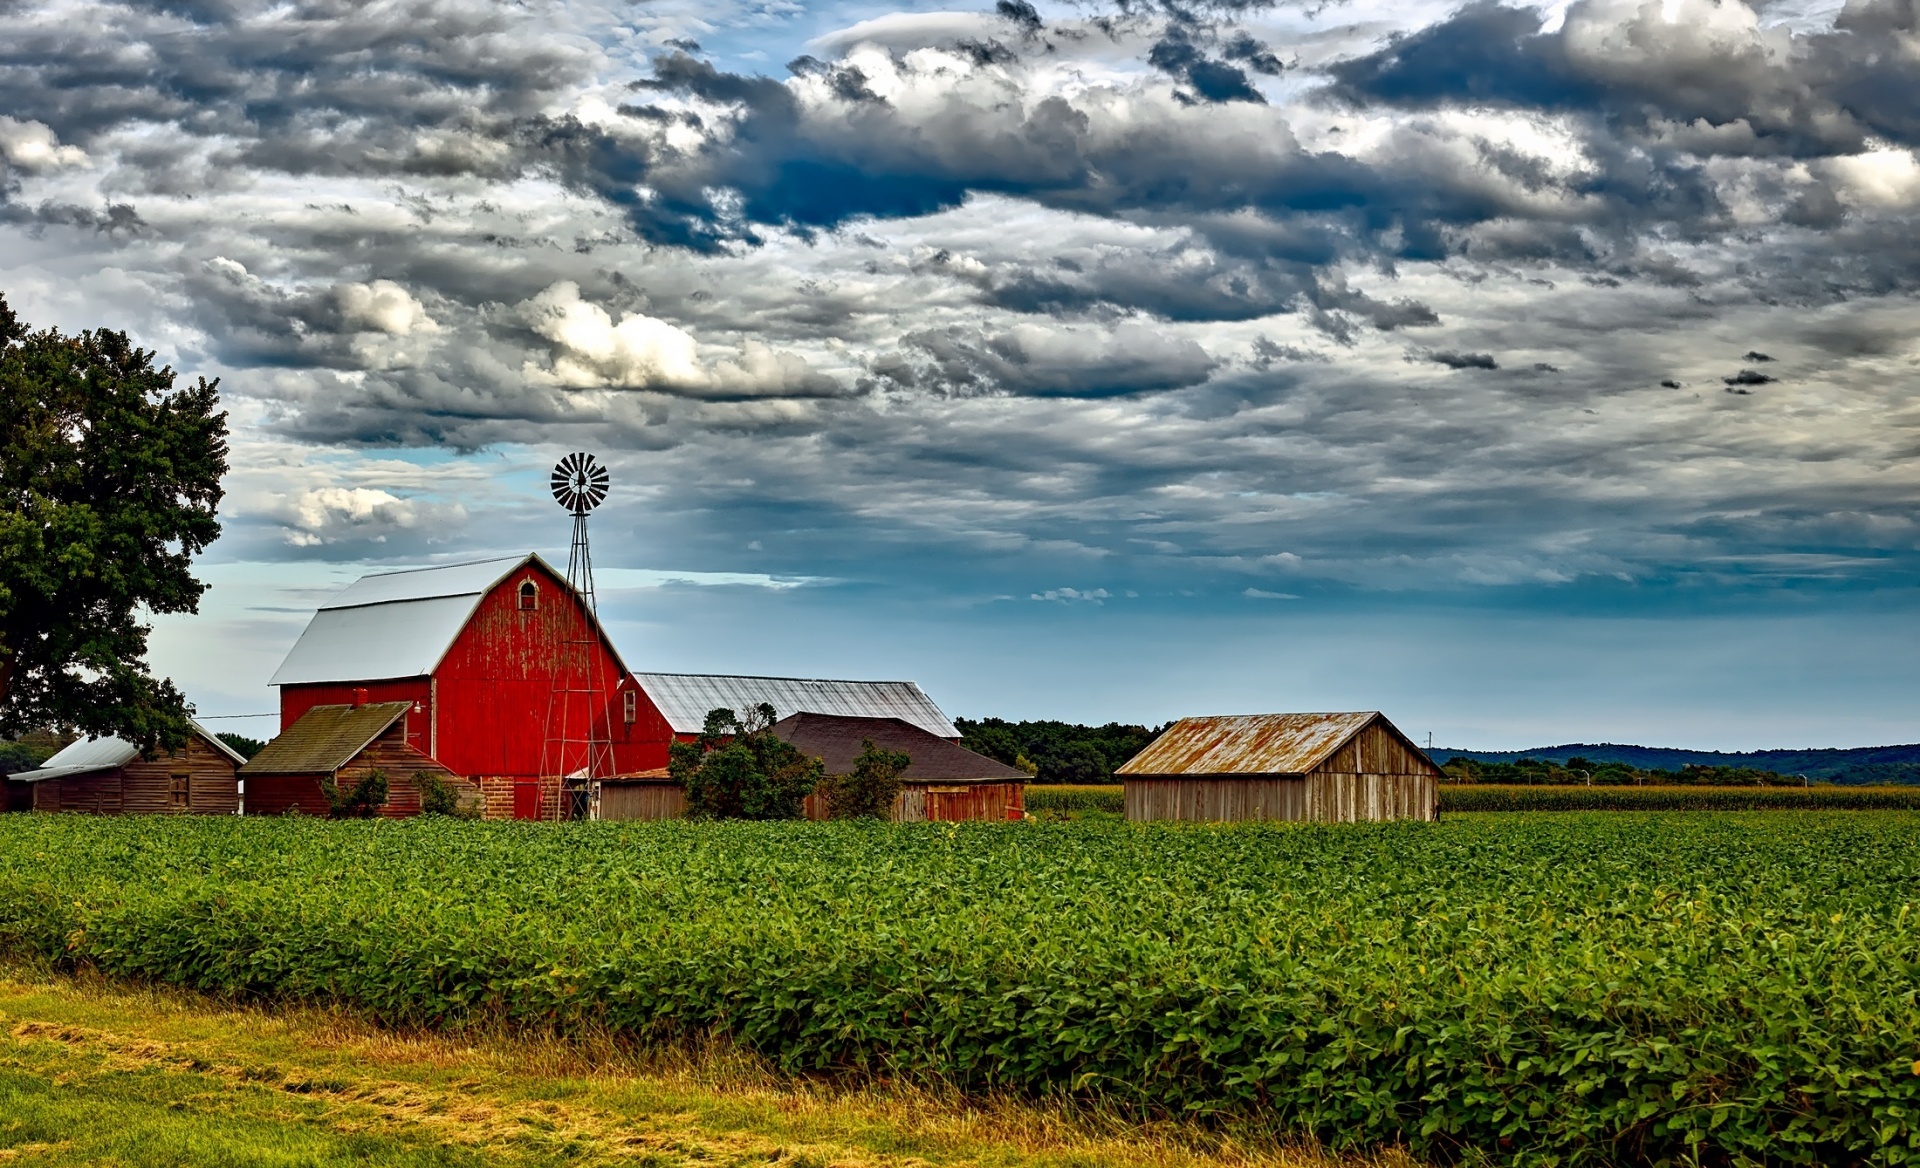 A picturesque farm, surrounded by green crops, under a cloudy sky.